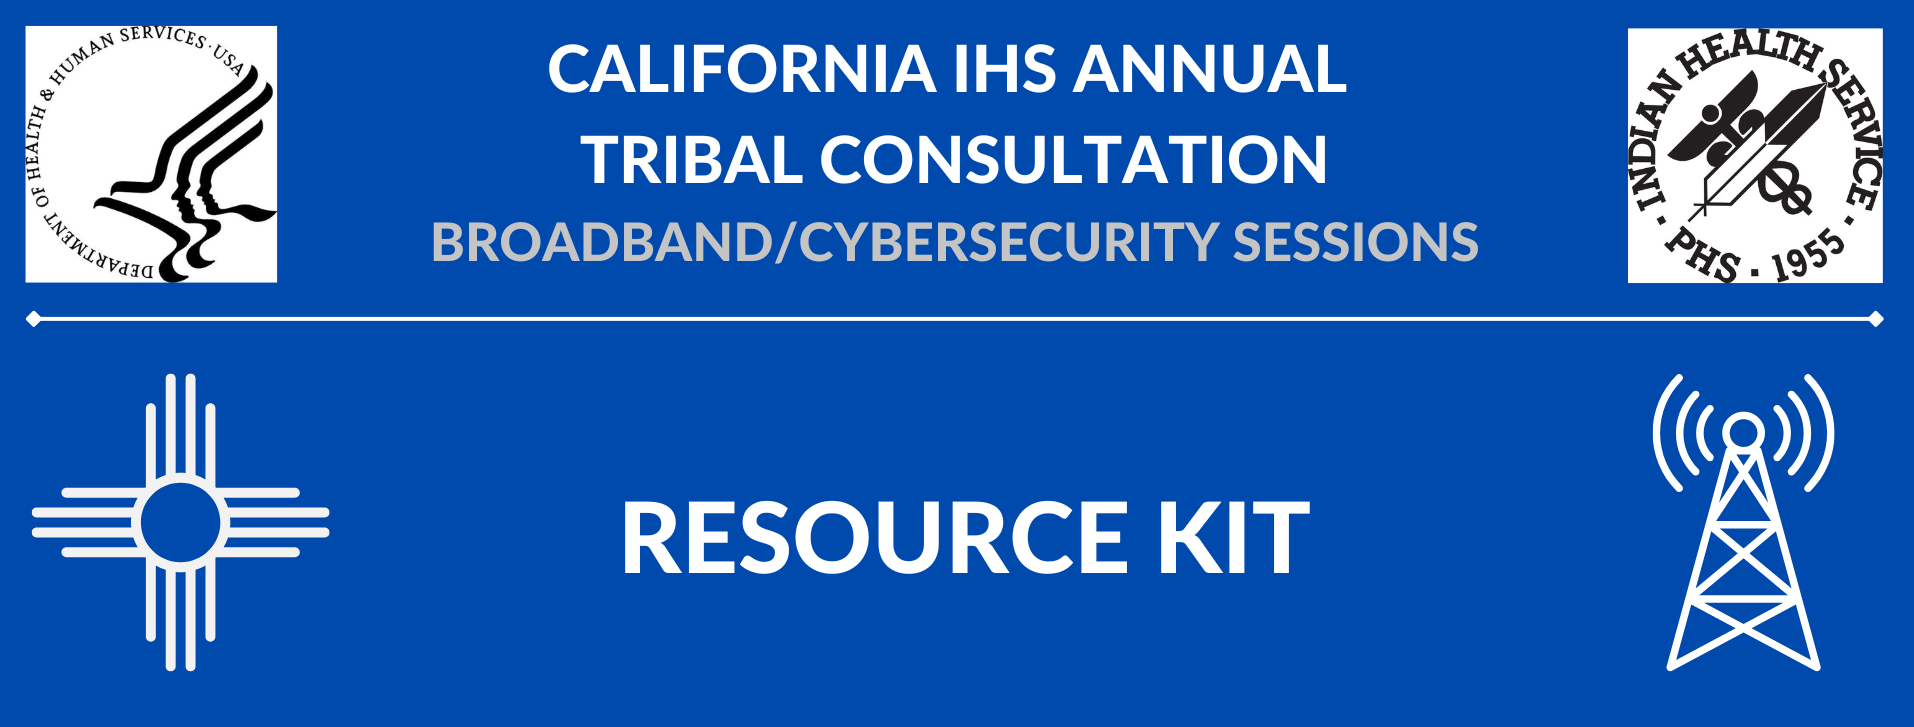 CALIFORNIA IHS ANNUAL TRIBAL CONSULTATION BROADBAND CYBERSECURITY SESSIONS - RESOURCE KIT